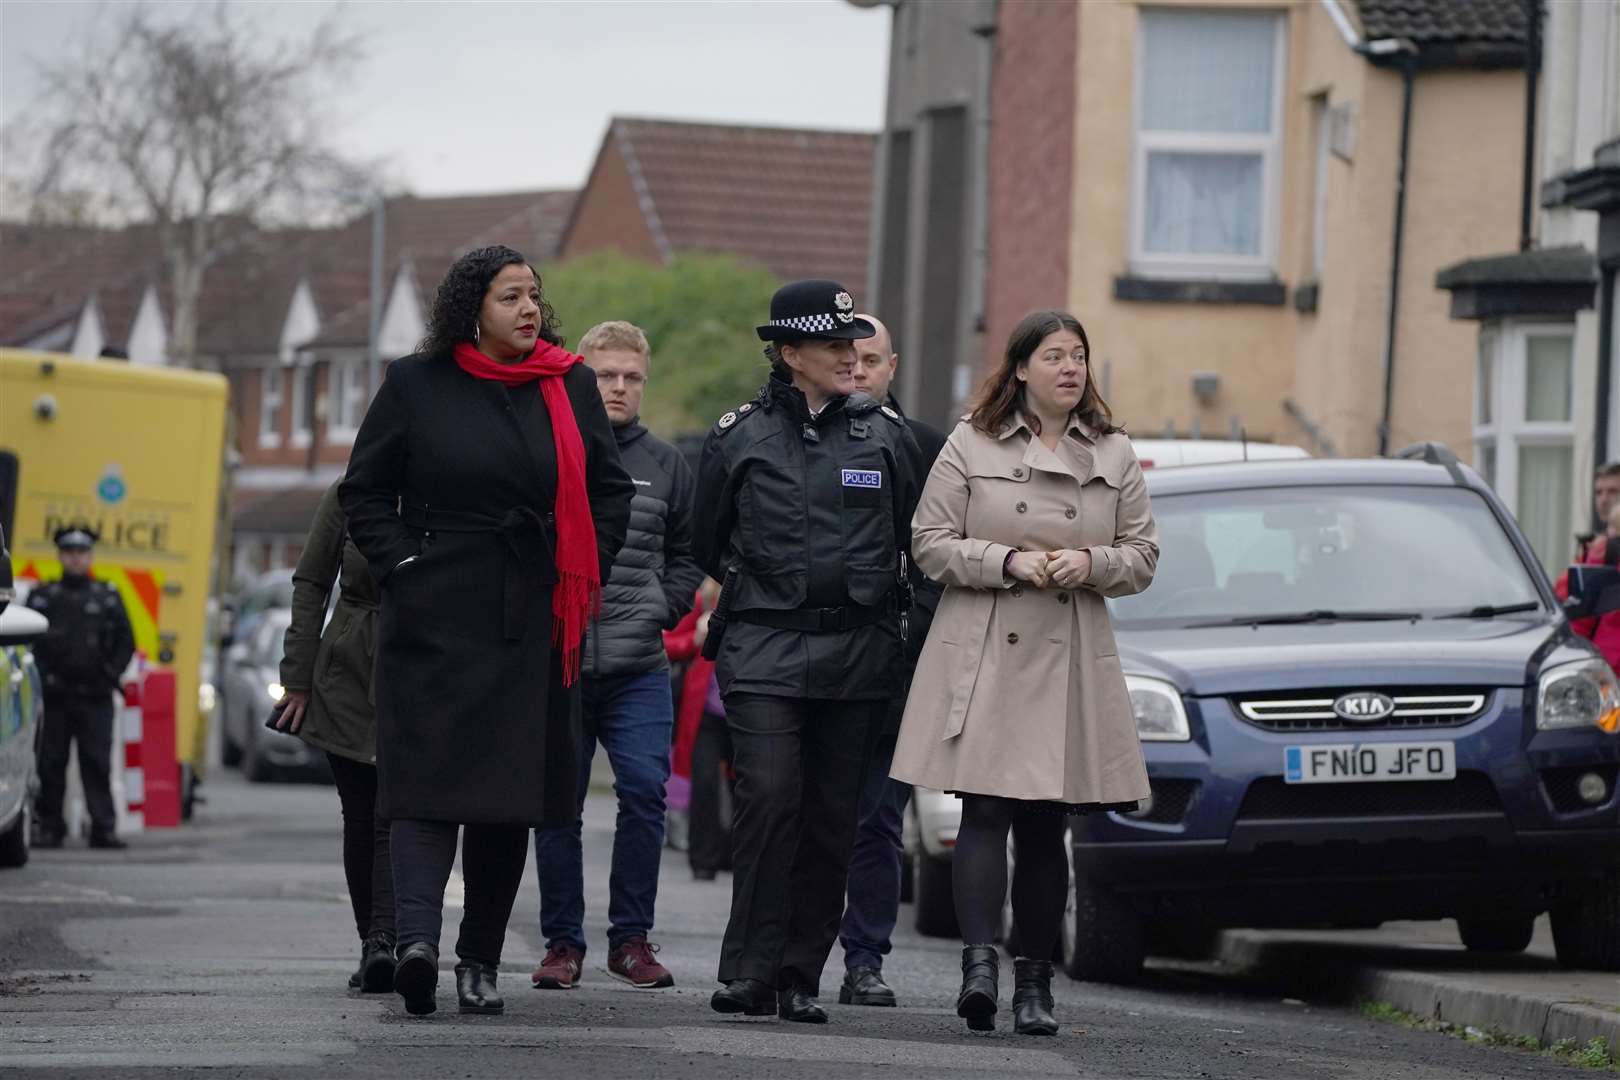 Joanna Anderson, Mayor of Liverpool, Merseyside Police Chief Constable Serena Kennedy and Merseyside’s Police and Crime Commissioner Emily Spurrell on a walkabout in Liverpool (Peter Byrne/PA)